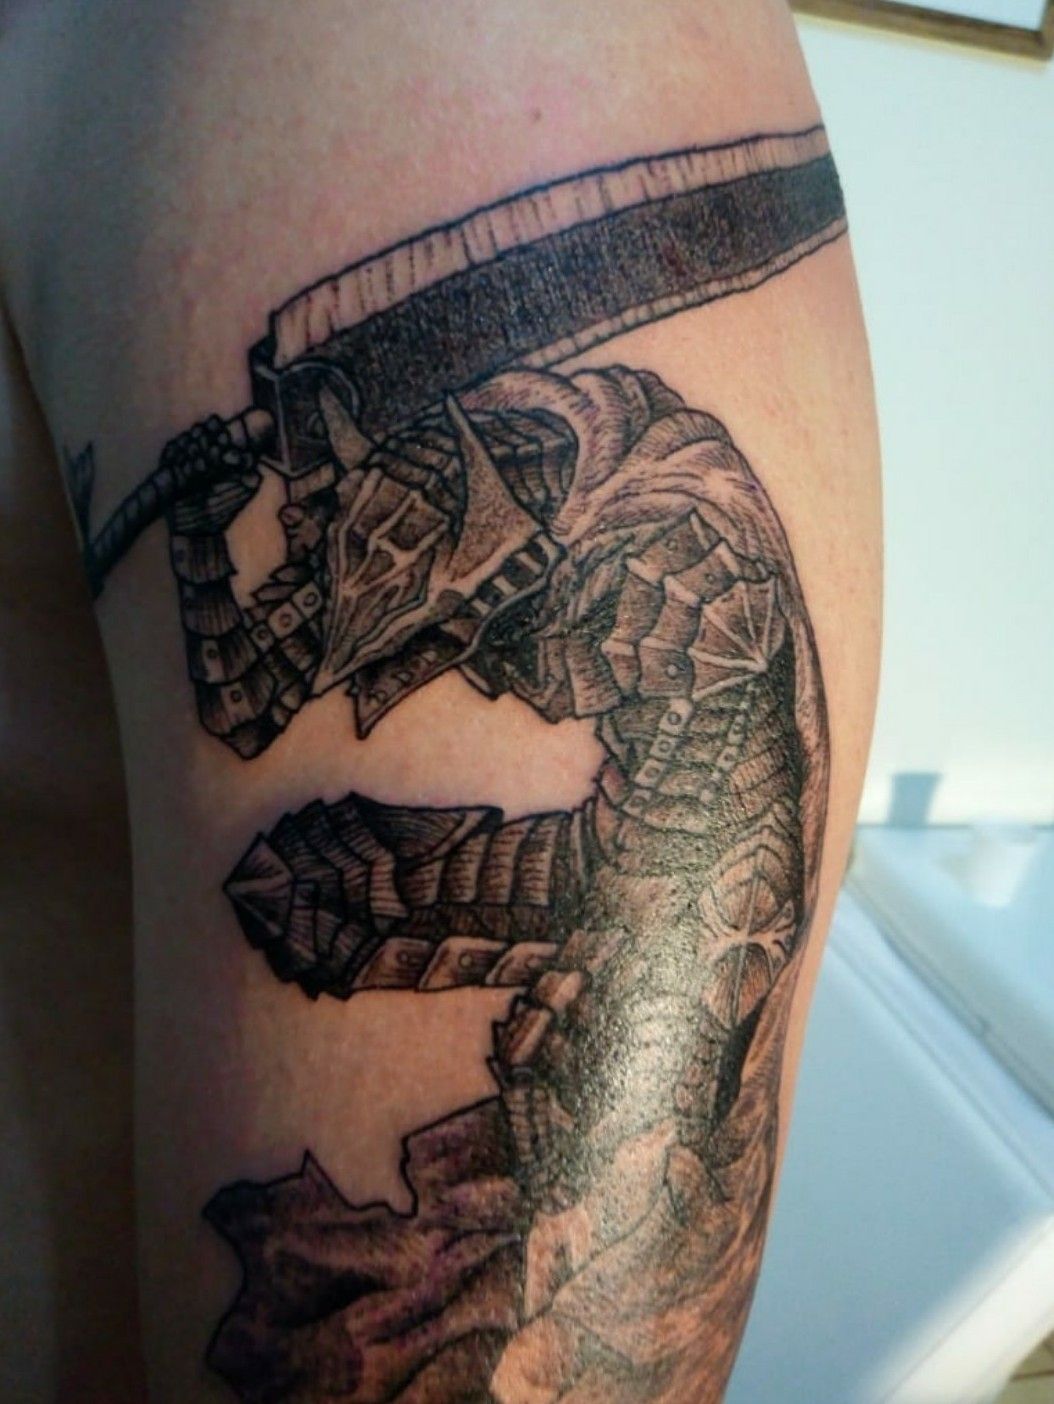 Destiny Tattoo  Berserker ArmorBerserk Thanks soravice  All the other  ones are healed Done by egorkabishev  berserk guts berserker  berserkerarmor  Facebook